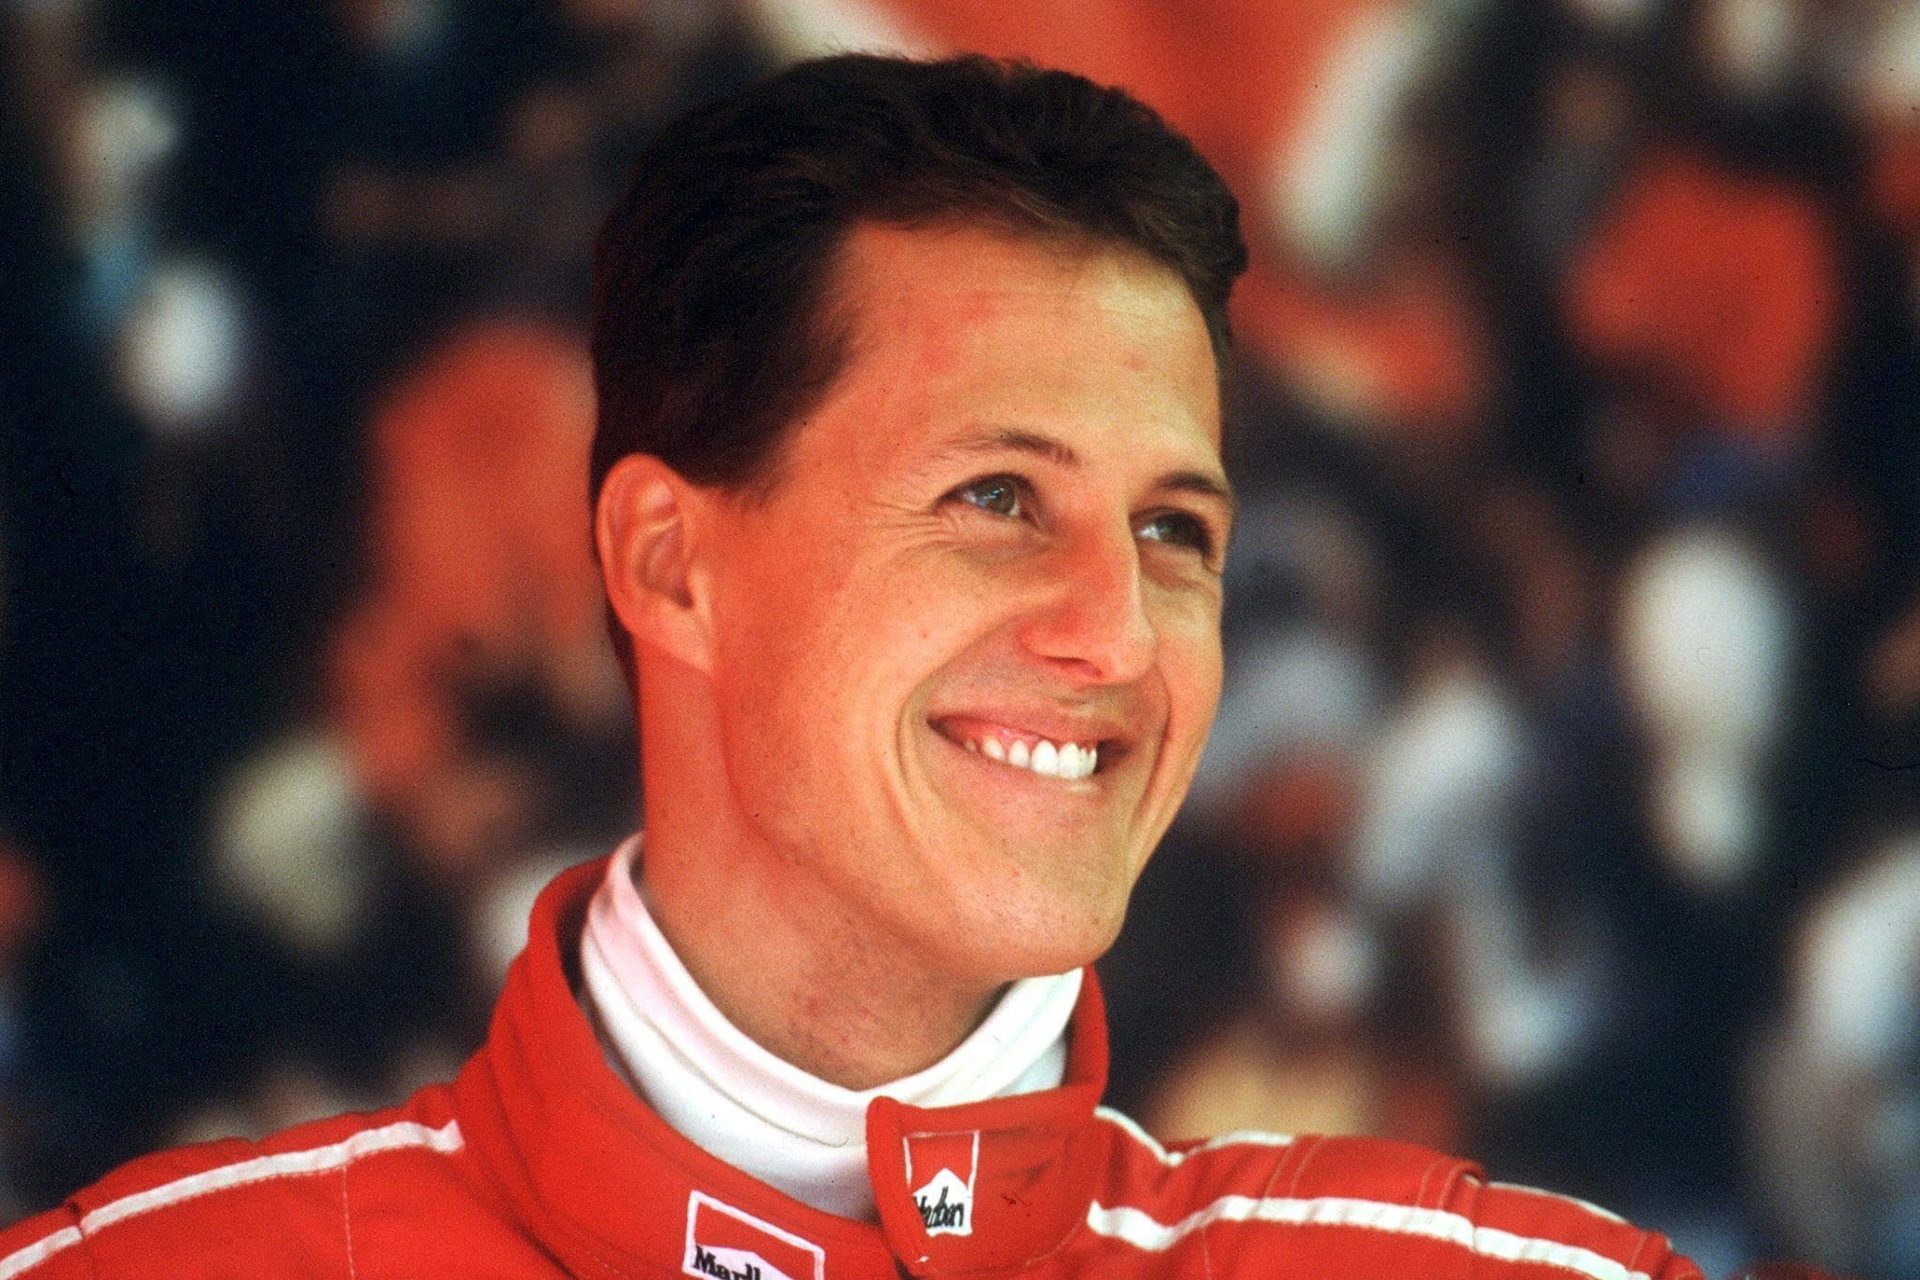 How Michael Schumacher's accident changed his brother Ralf